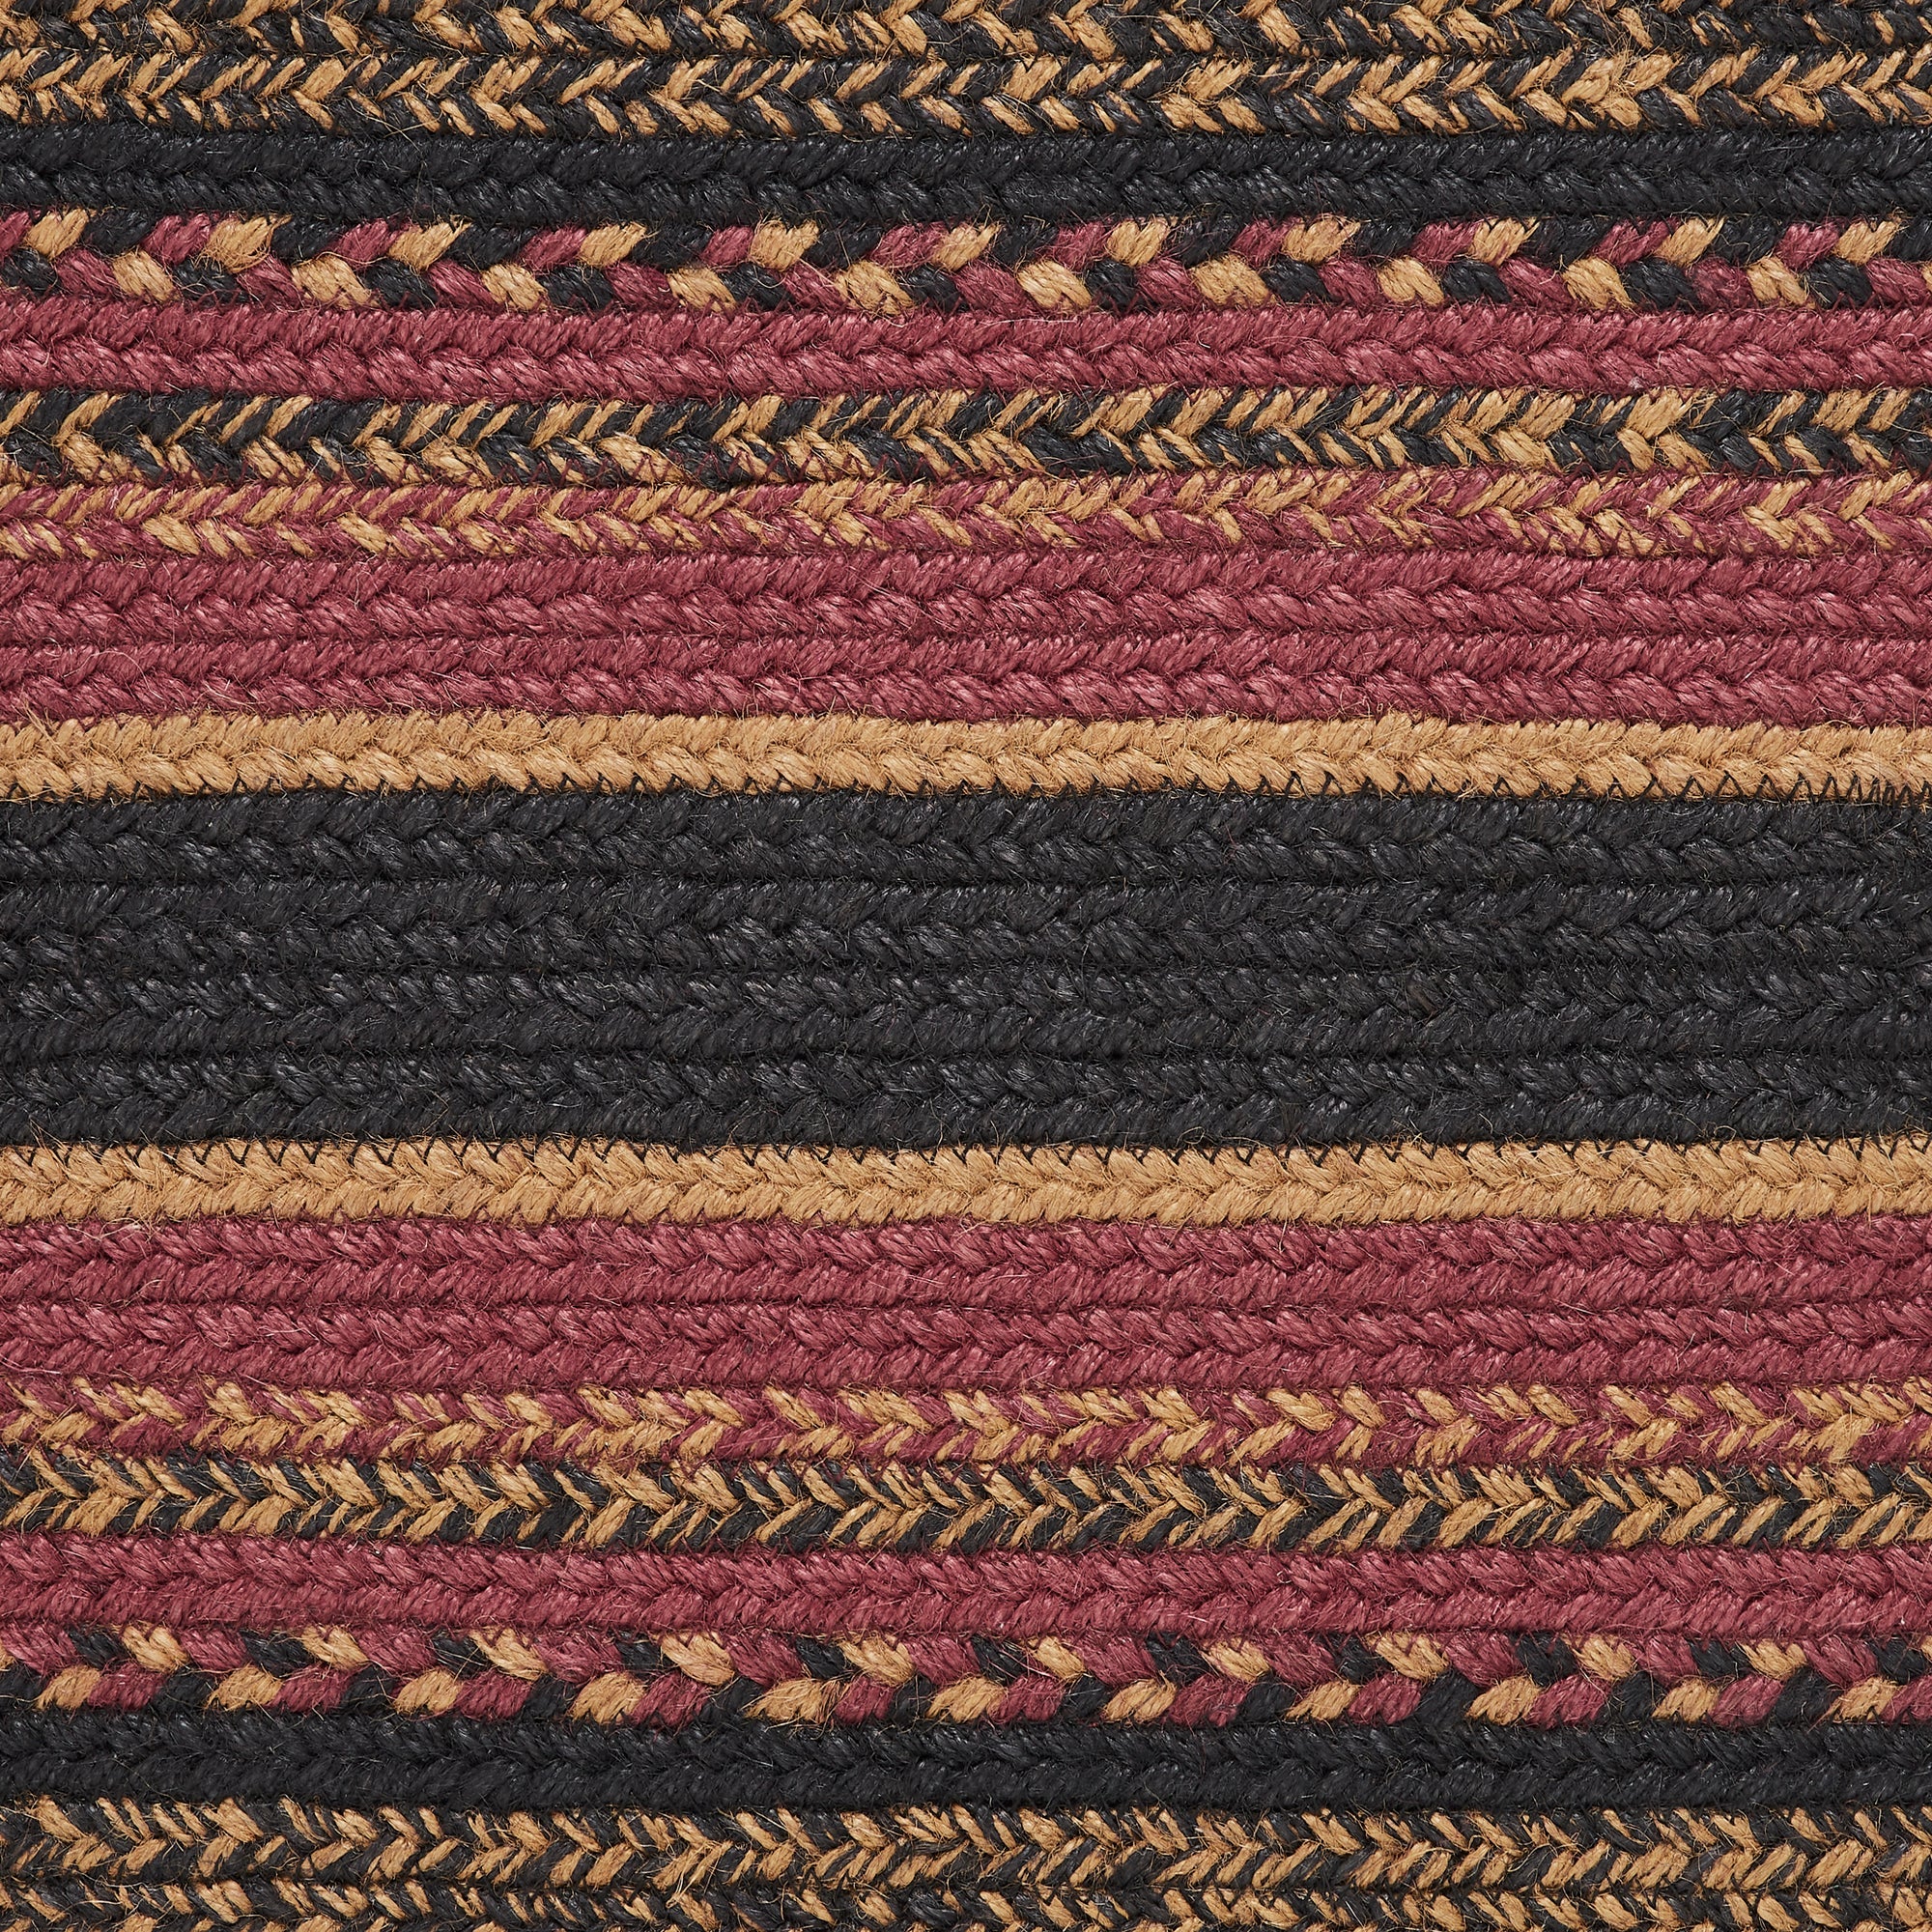 Heritage Farms Jute Braided Rug Rect. with Rug Pad 5'x8' VHC Brands